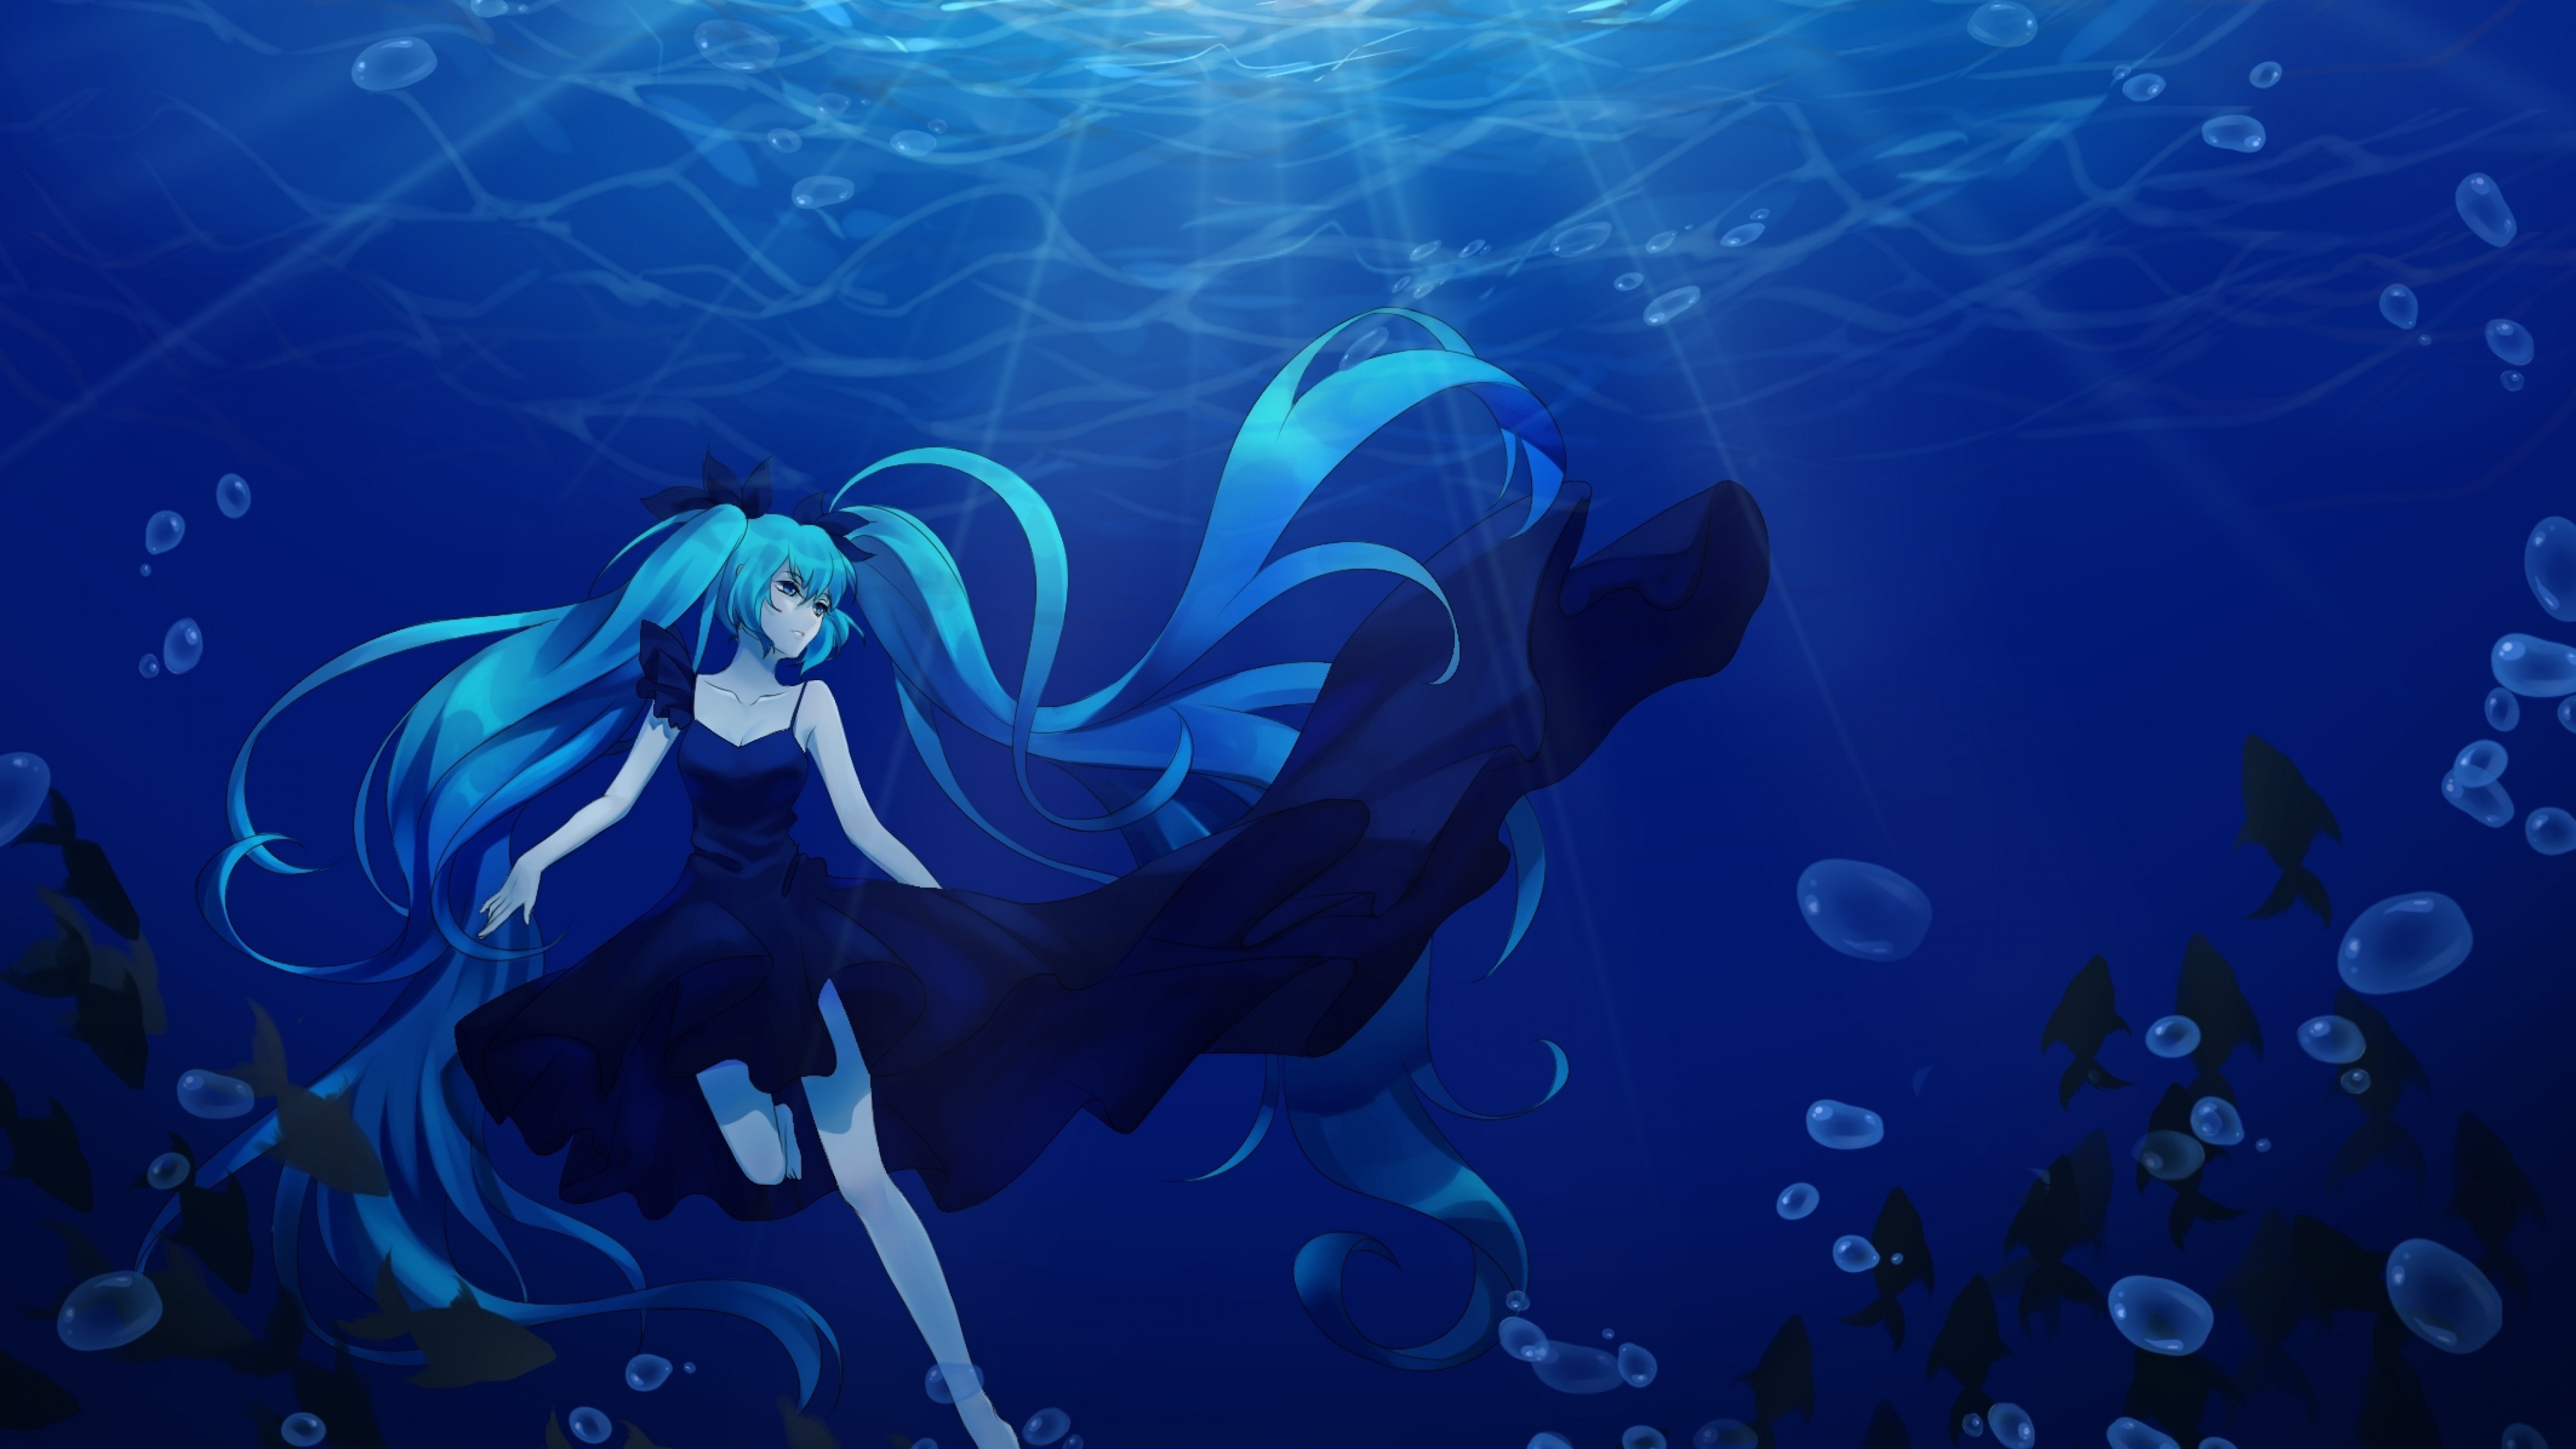 Anime Girl And Water windows background